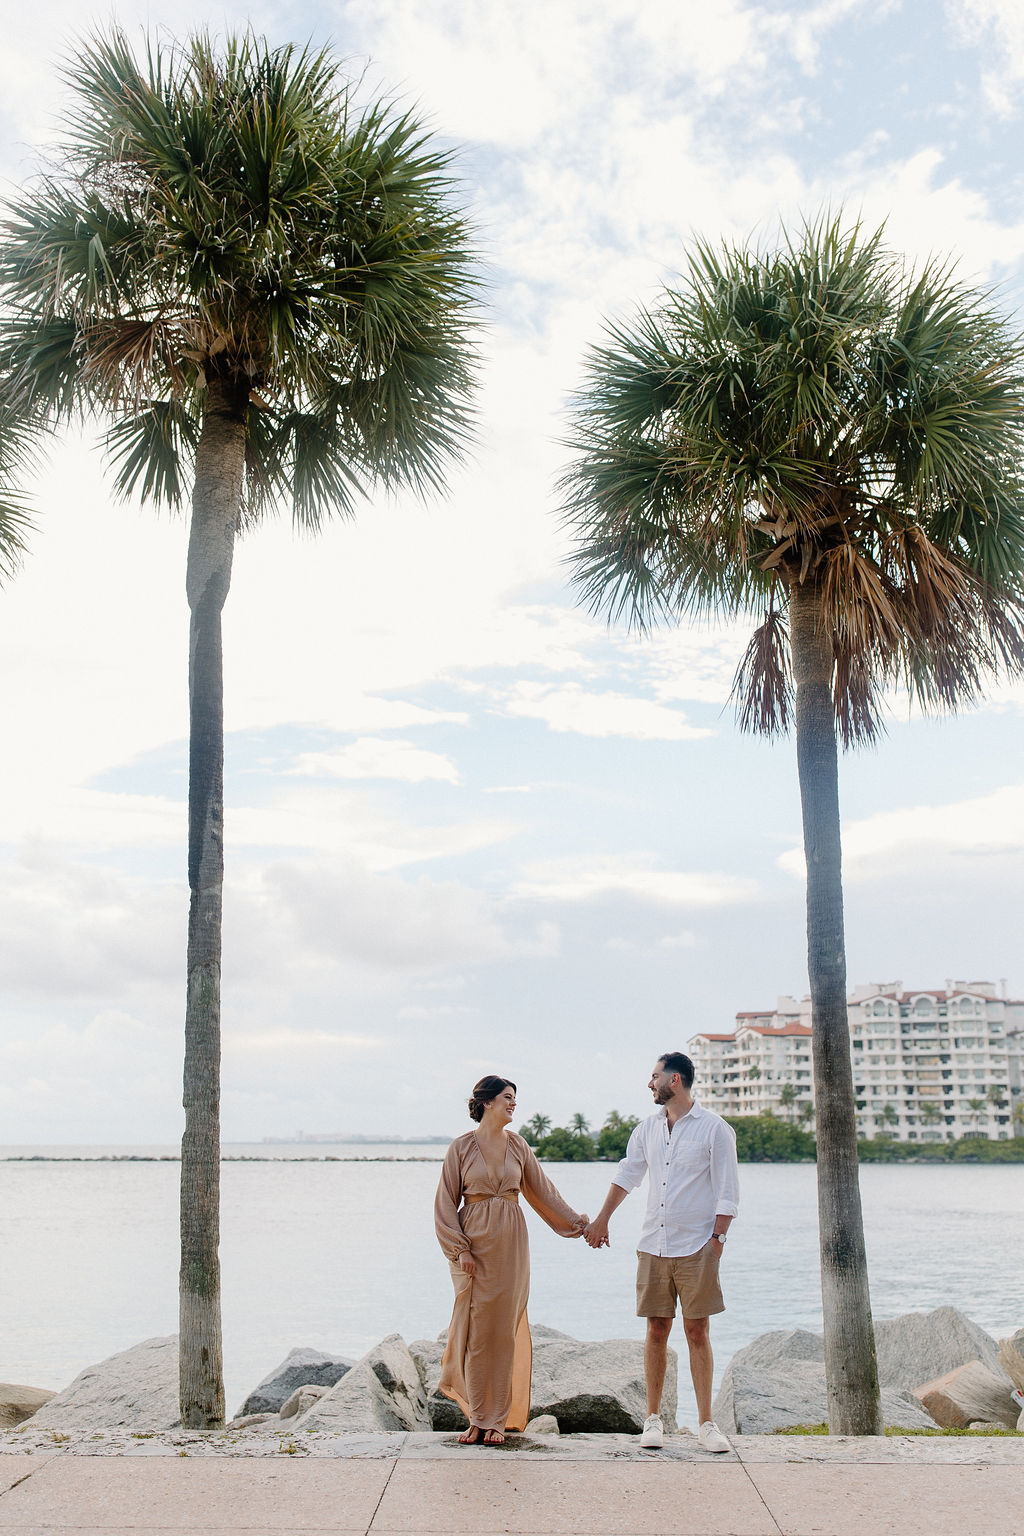 South Pointe Park Engagement Photos, South Pointe Park Engagement, Miami Engagement Photographer, Erika Tuesta Photography